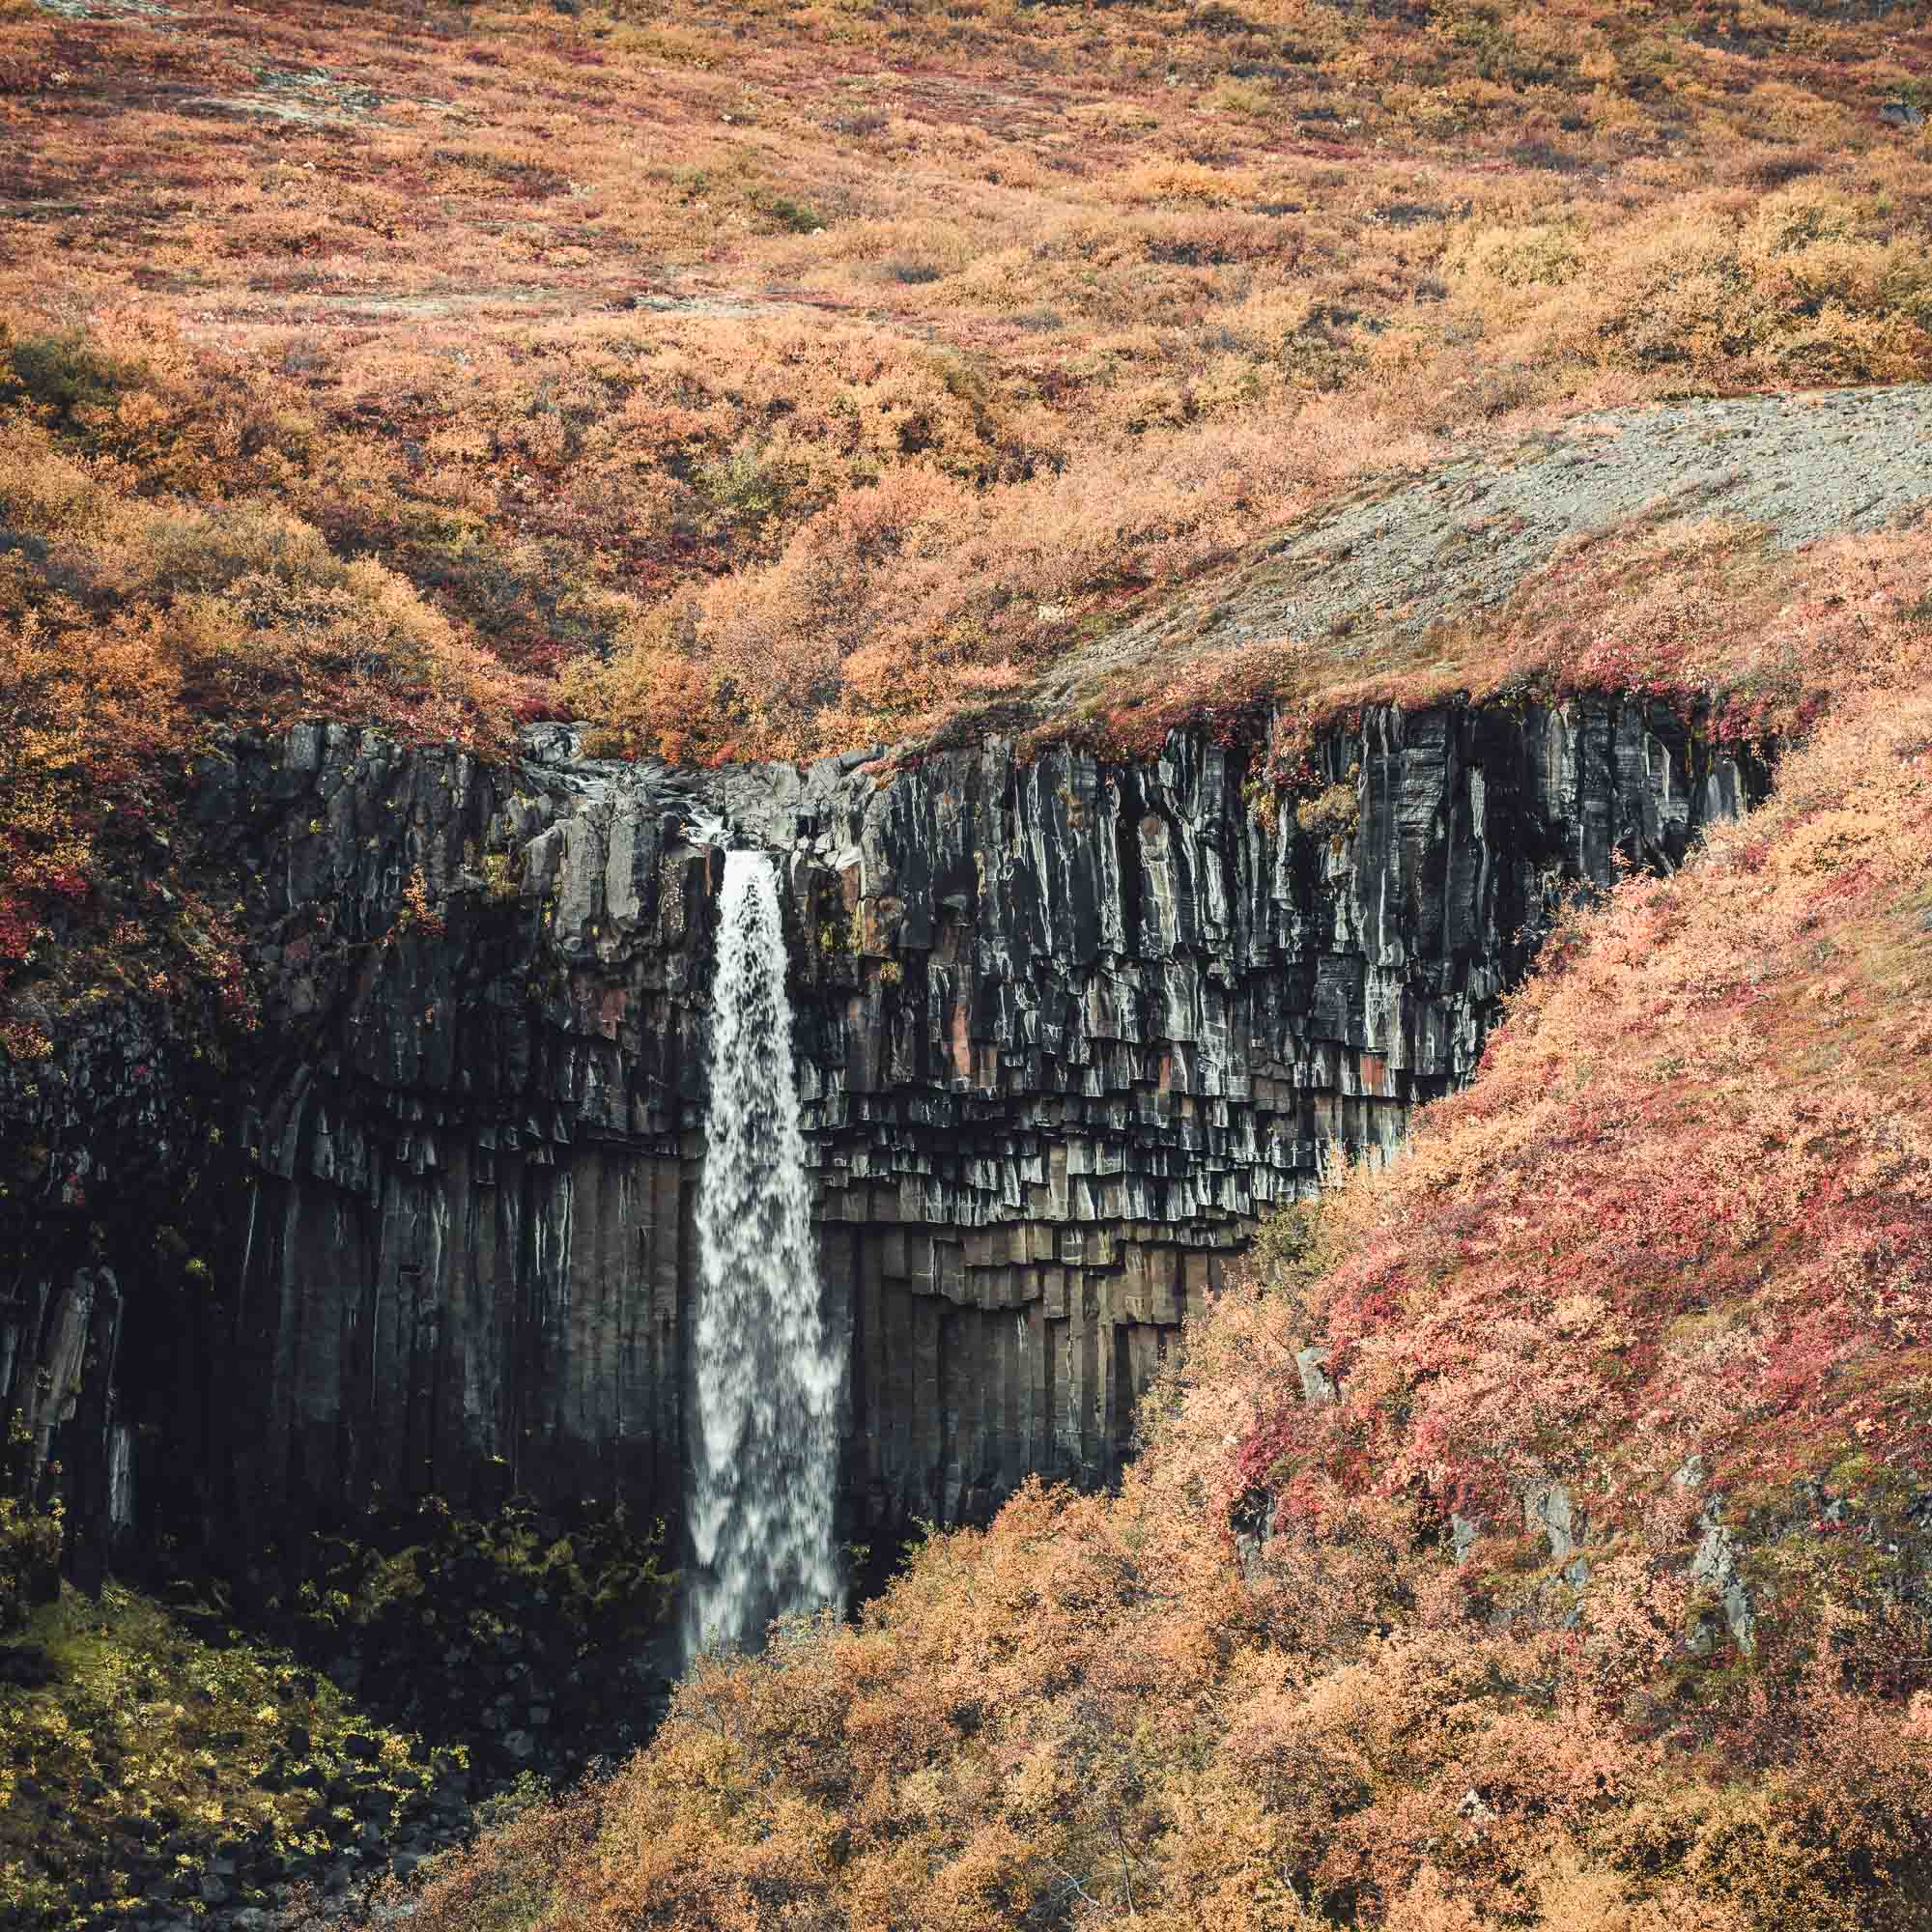 Svartifoss waterfall in Iceland, renowned for its striking basalt columns, surrounded by the colorful foliage of autumn.